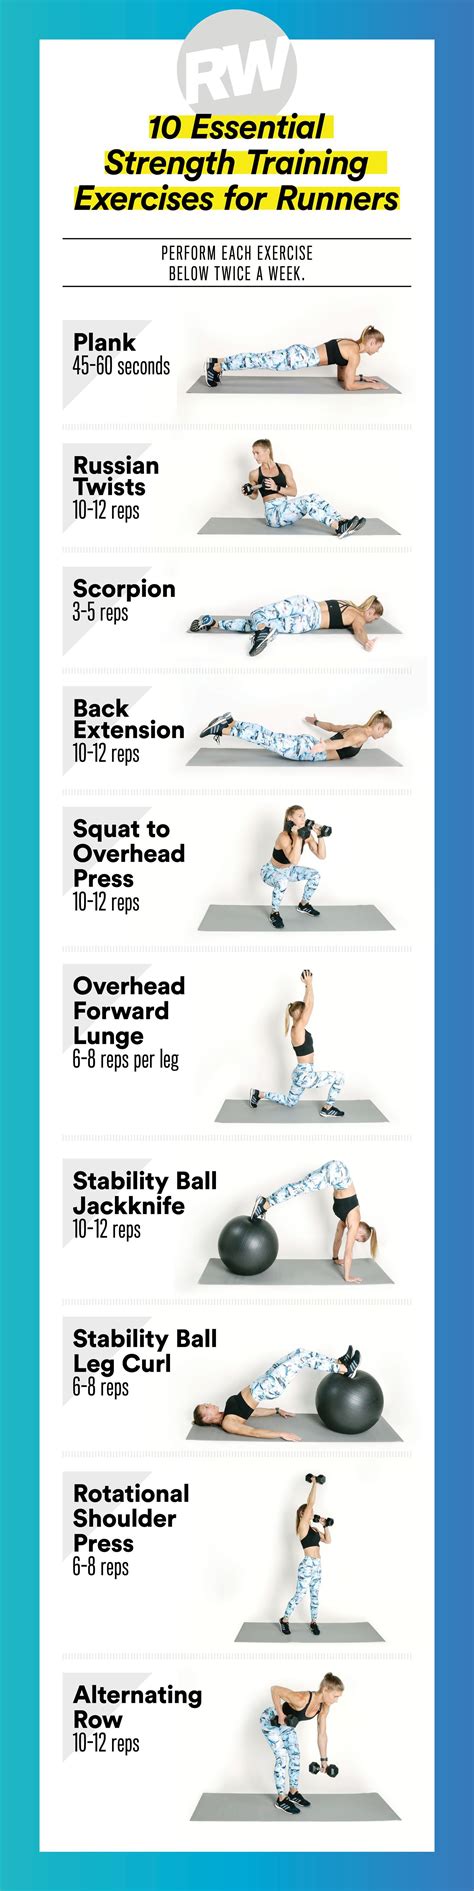 10 Essential Strength Training Exercises You Need To Add To Your Routine Weight Lifting Schedule